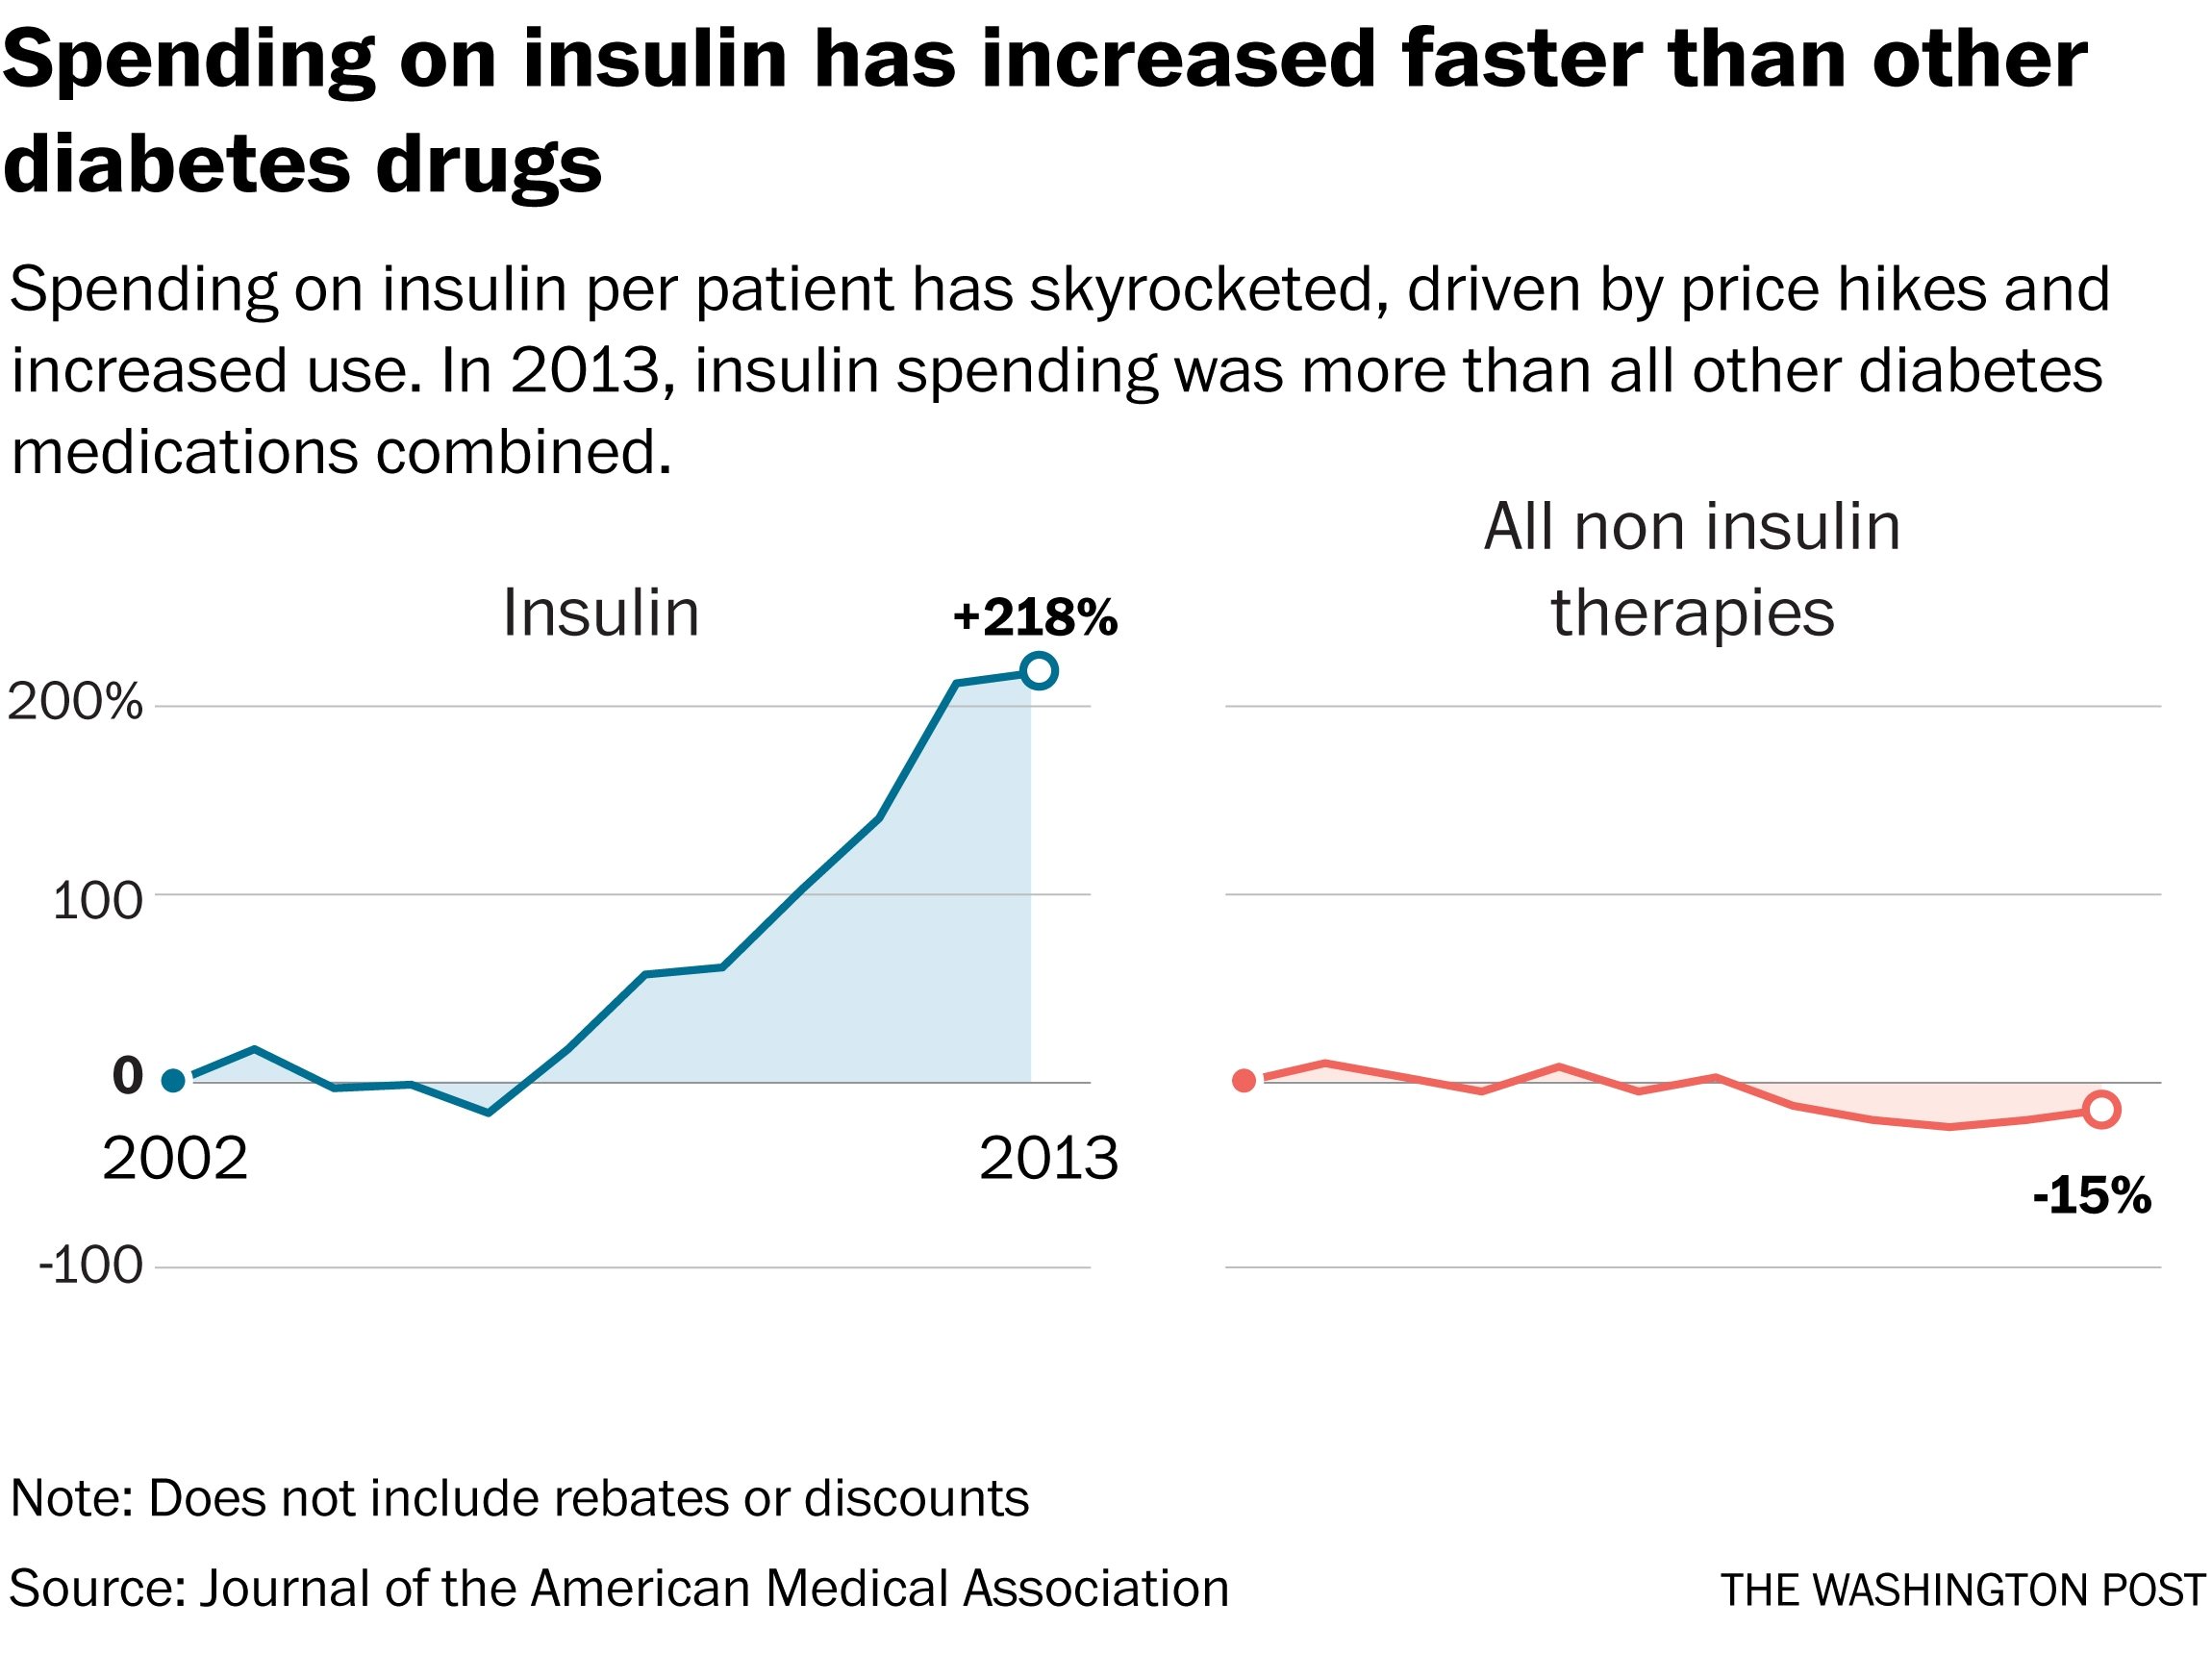 Why treating diabetes keeps getting more expensive